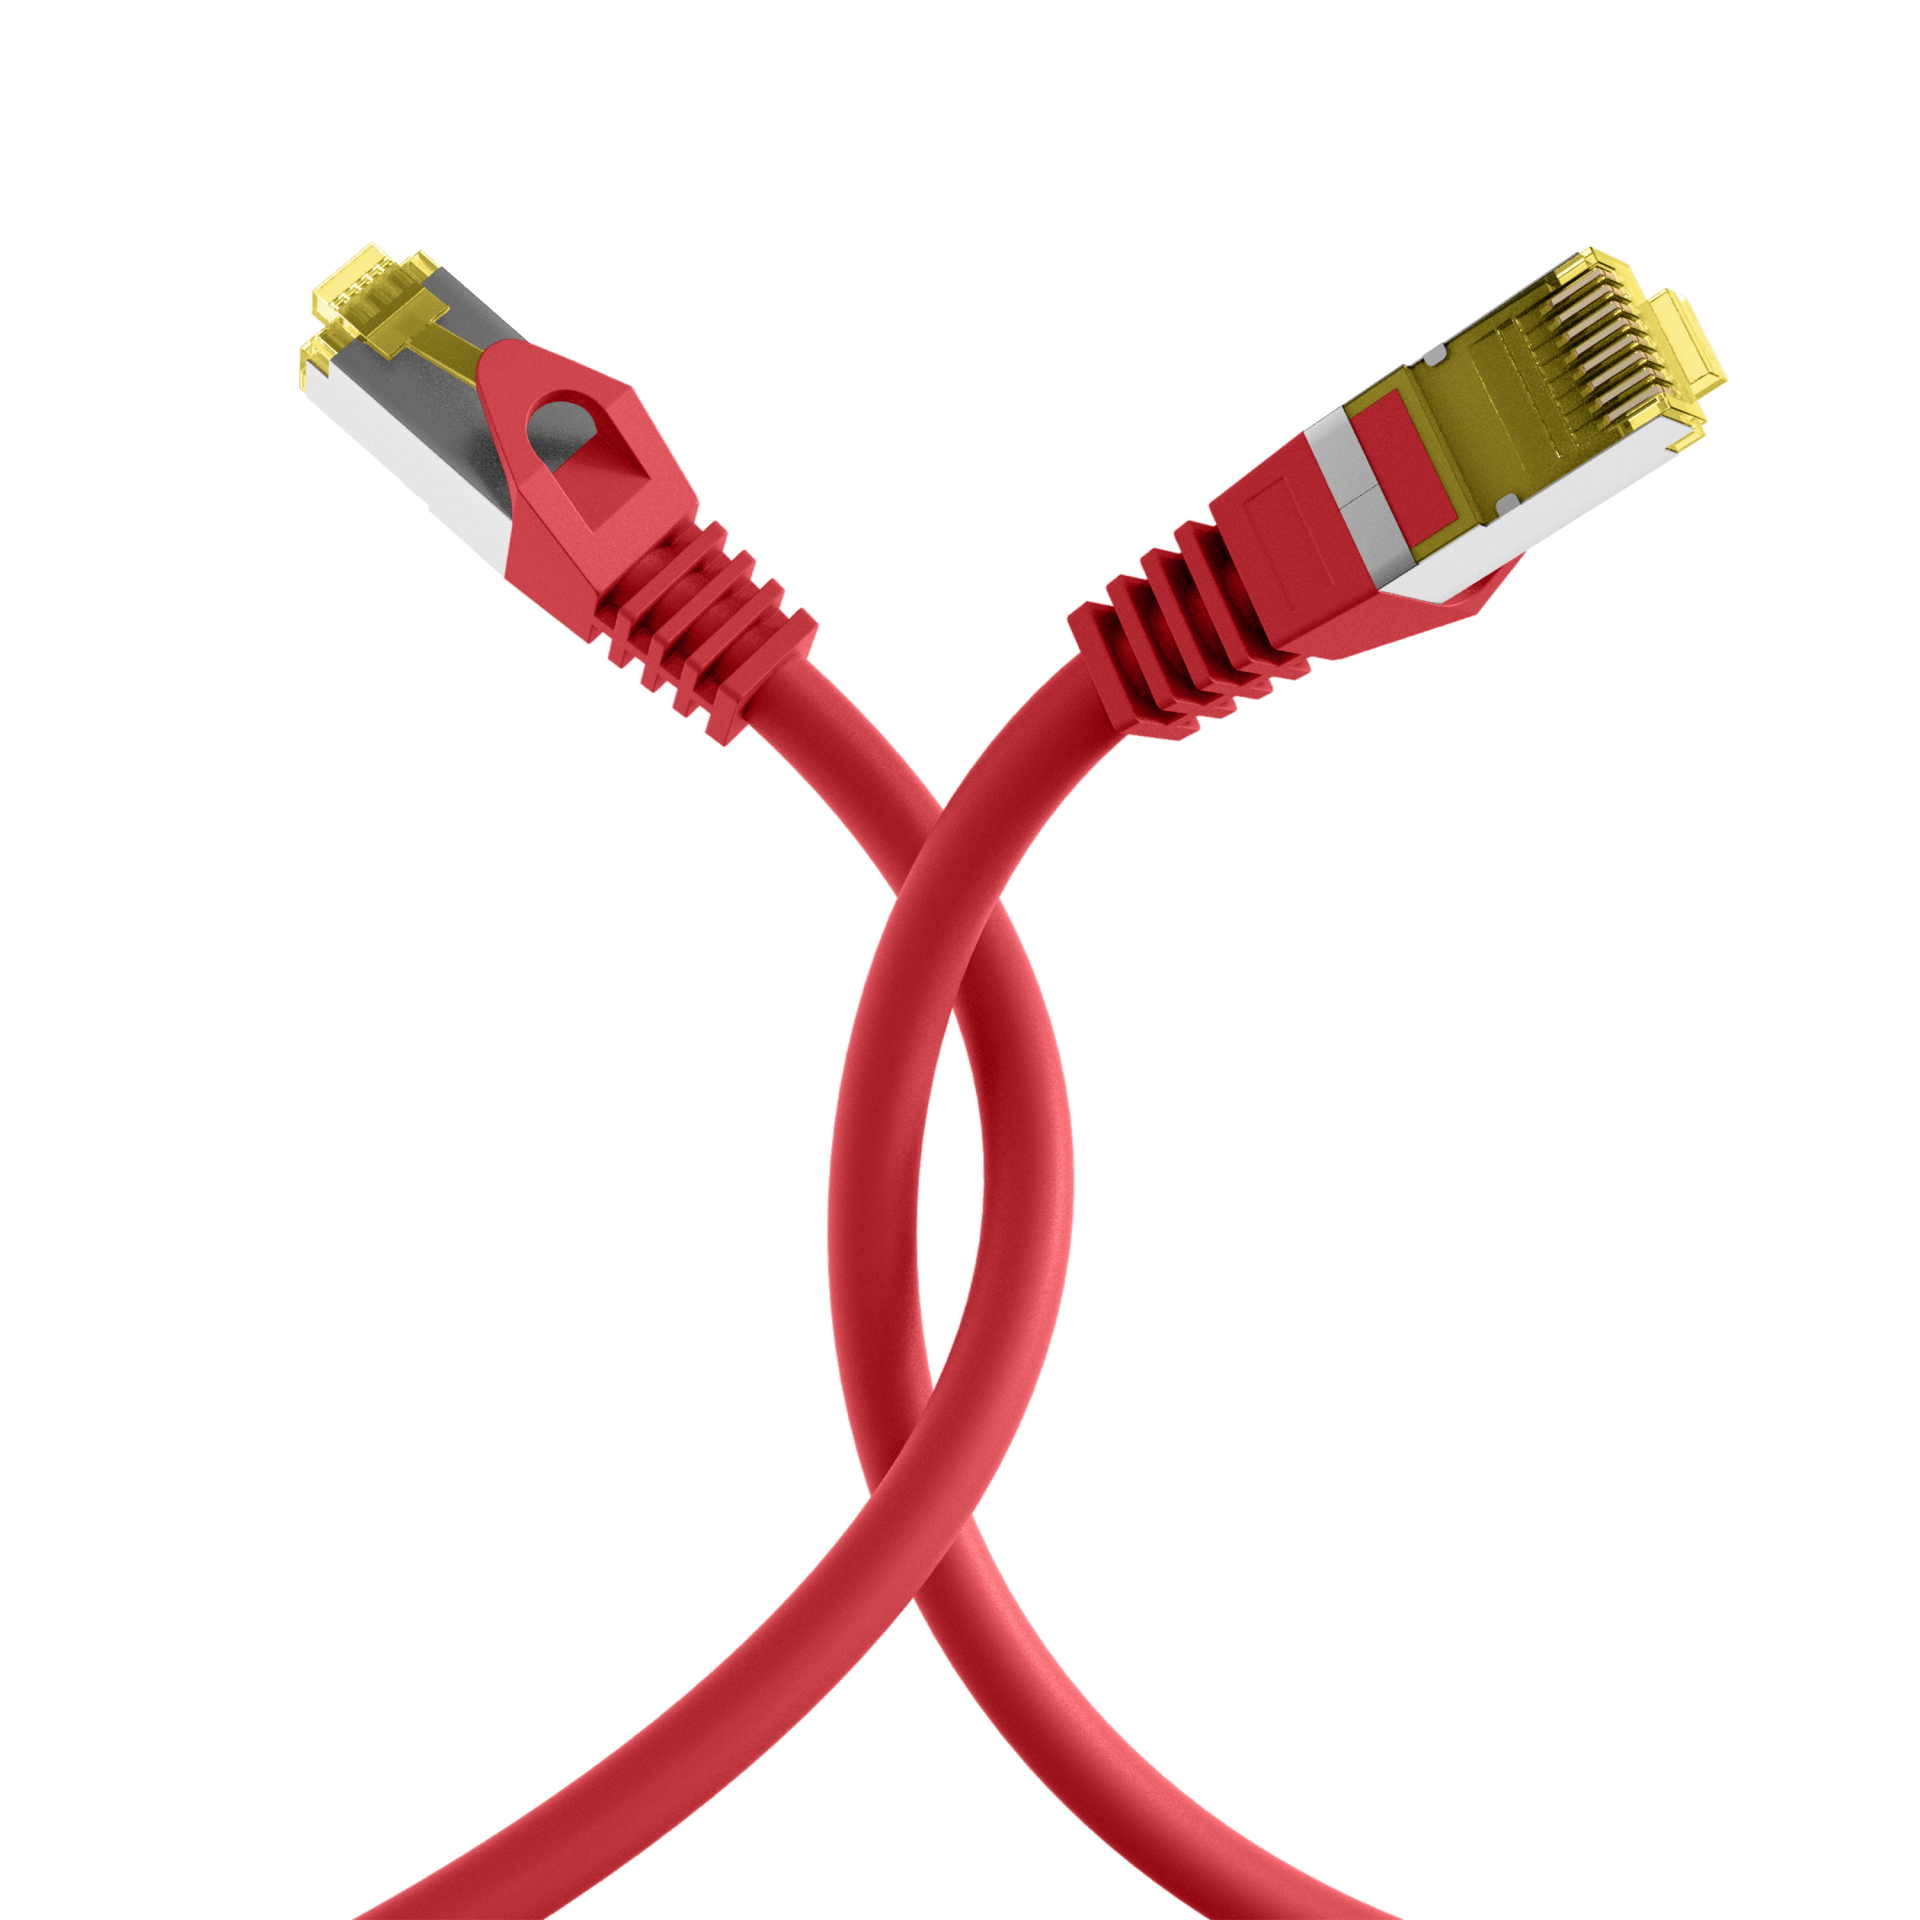 CAT 7 S-FTP patch cable, LSZH – Red